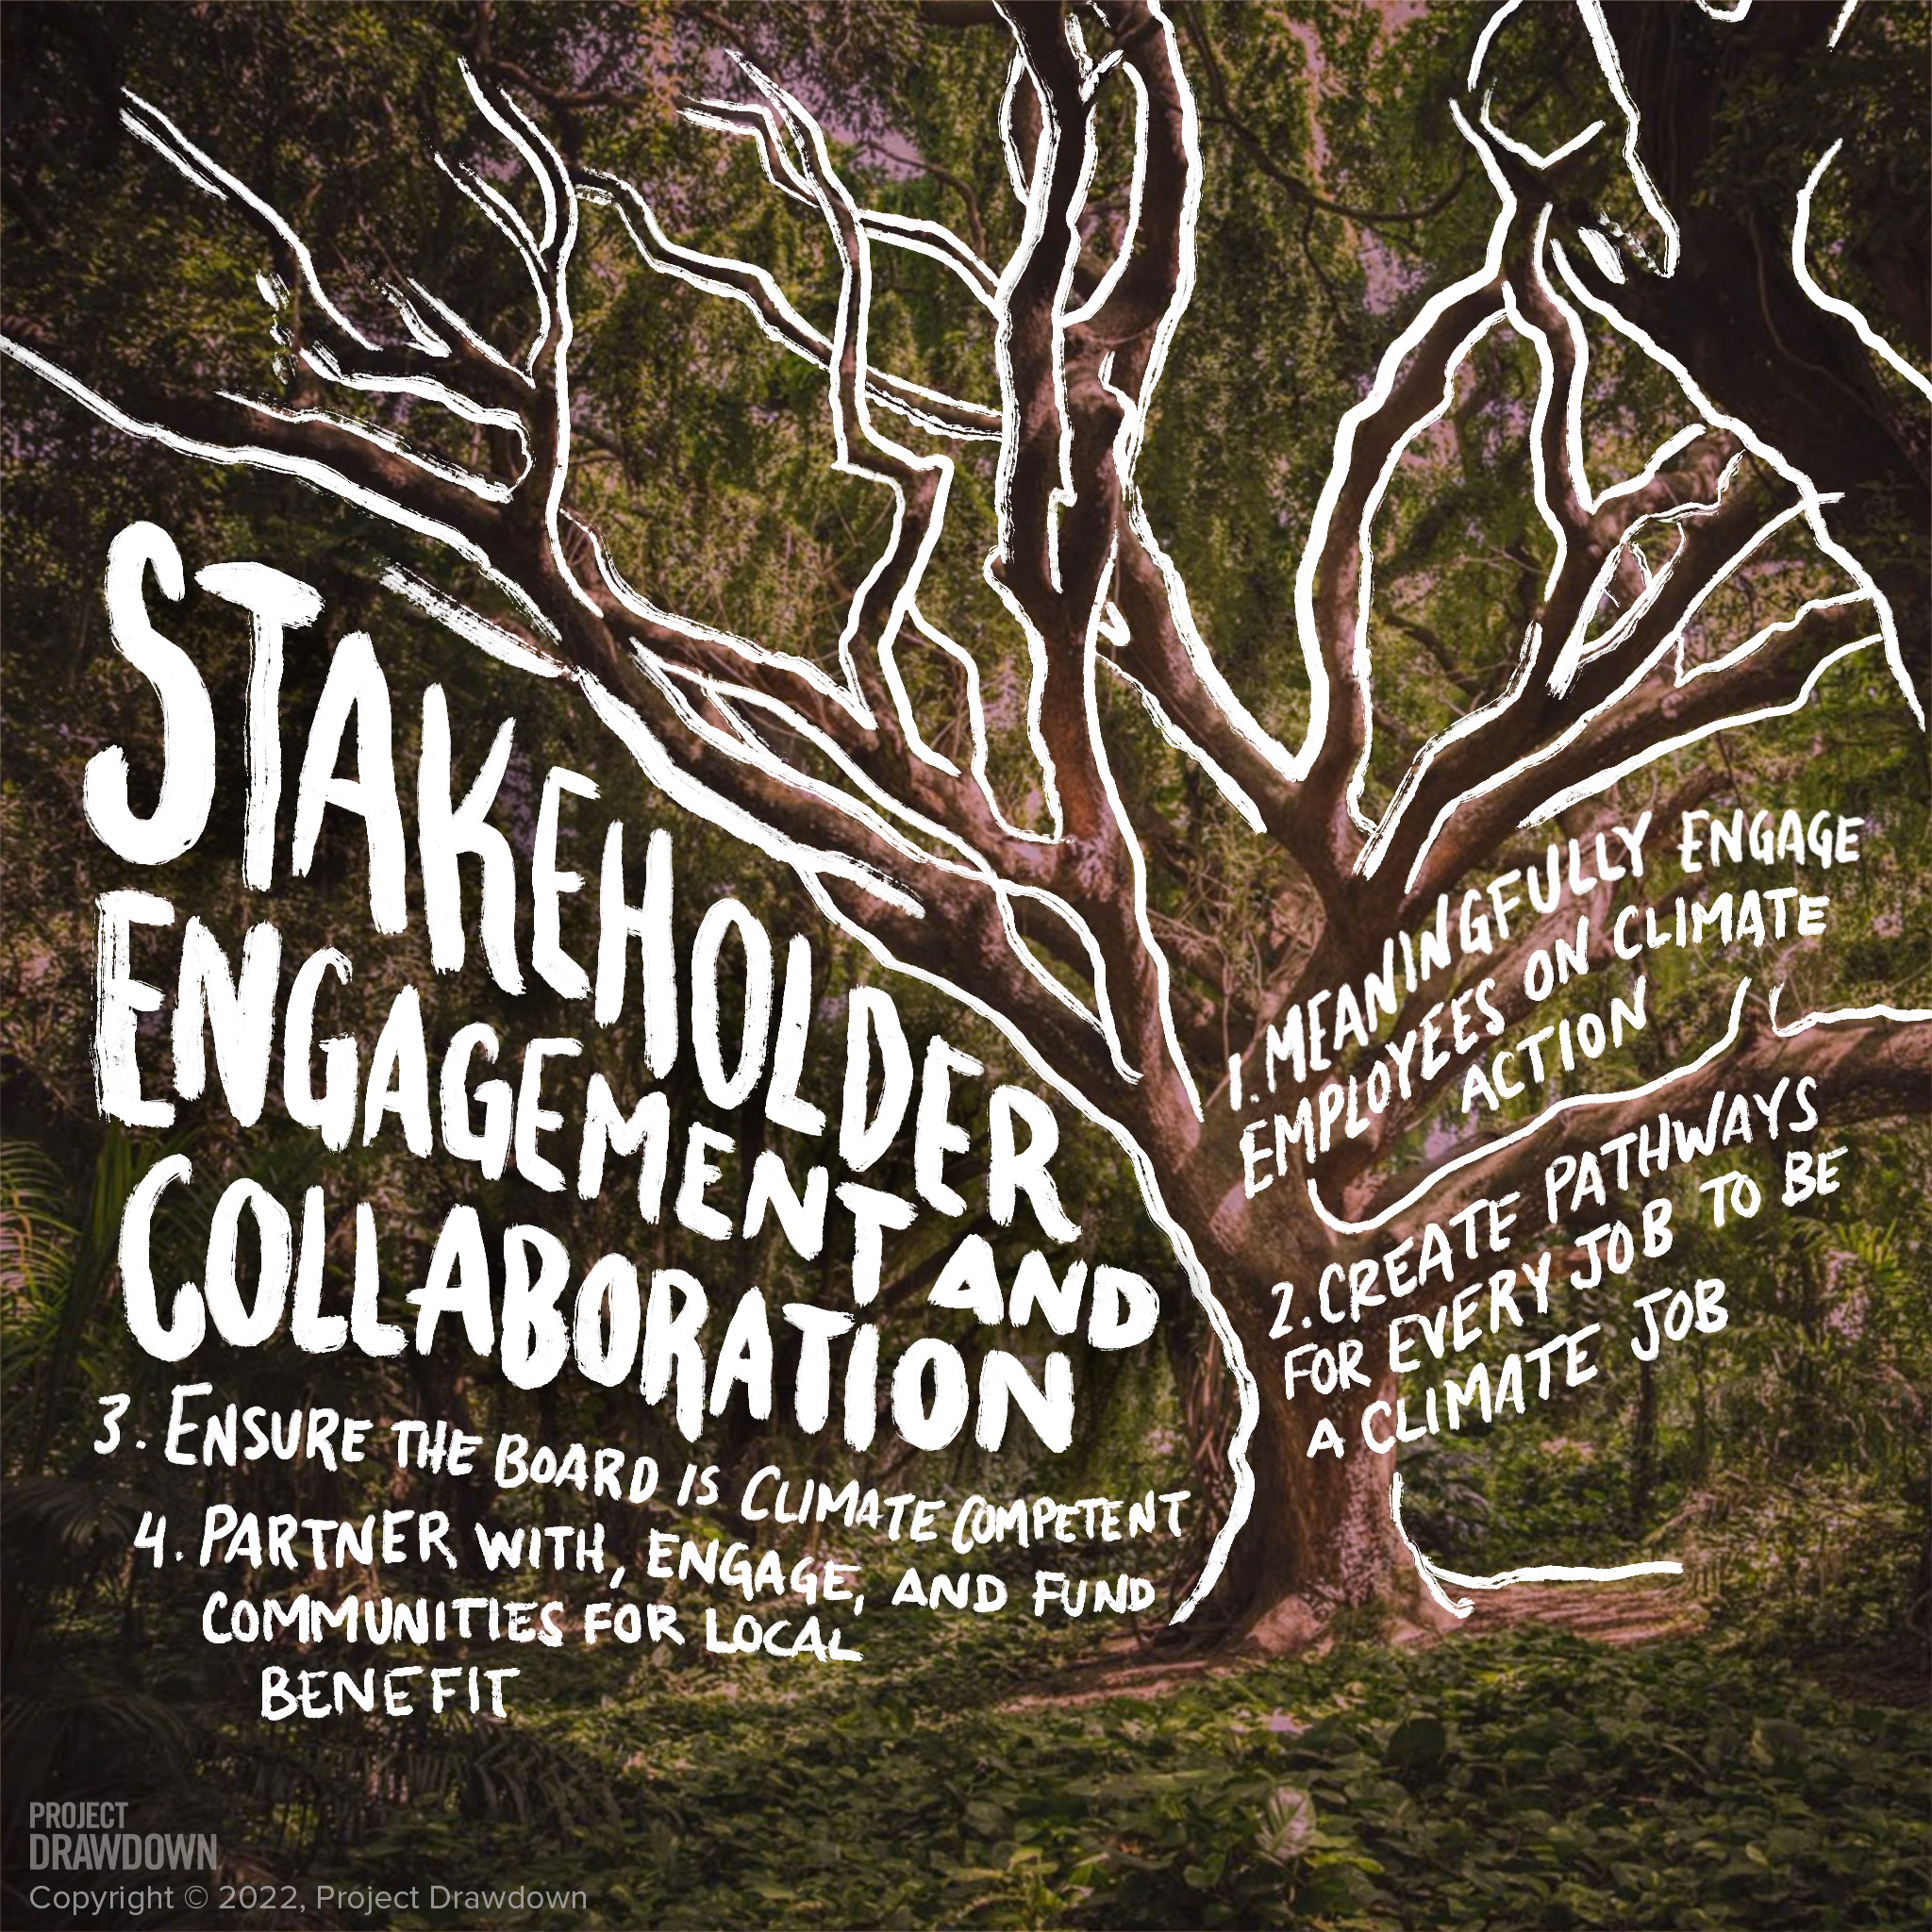 Titled: Stakeholder Engagement and Collaboration, drawing of a tree in background.